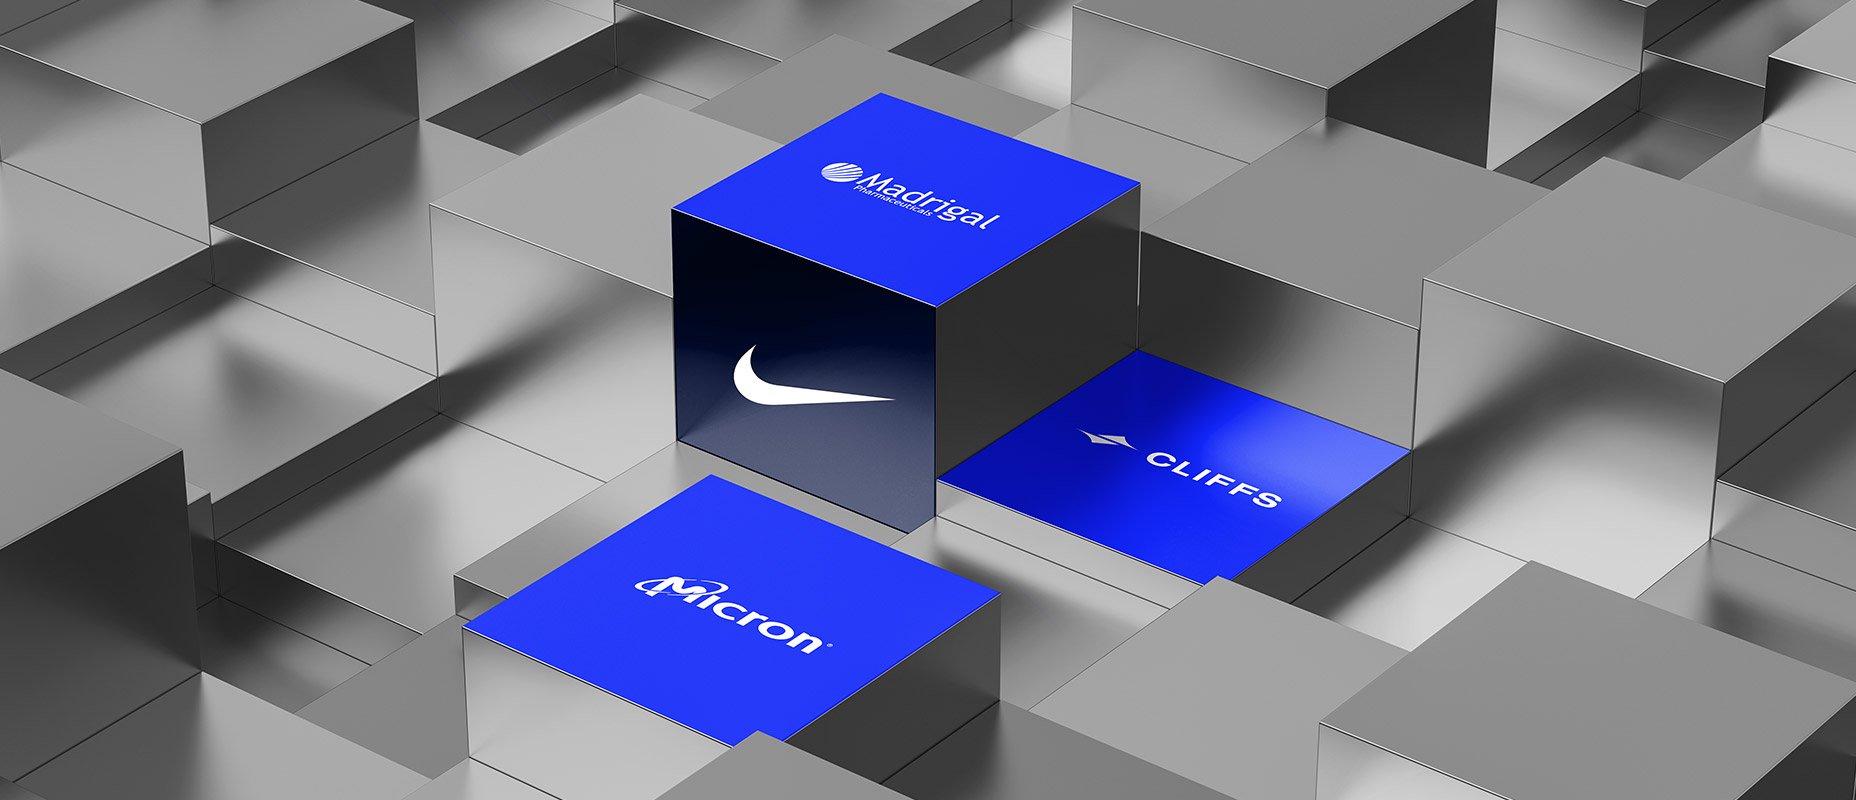 Nike, Micron, Cleveland-Cliffs, and Madrigal Pharmaceuticals: Weekly Digest (19-23 December)